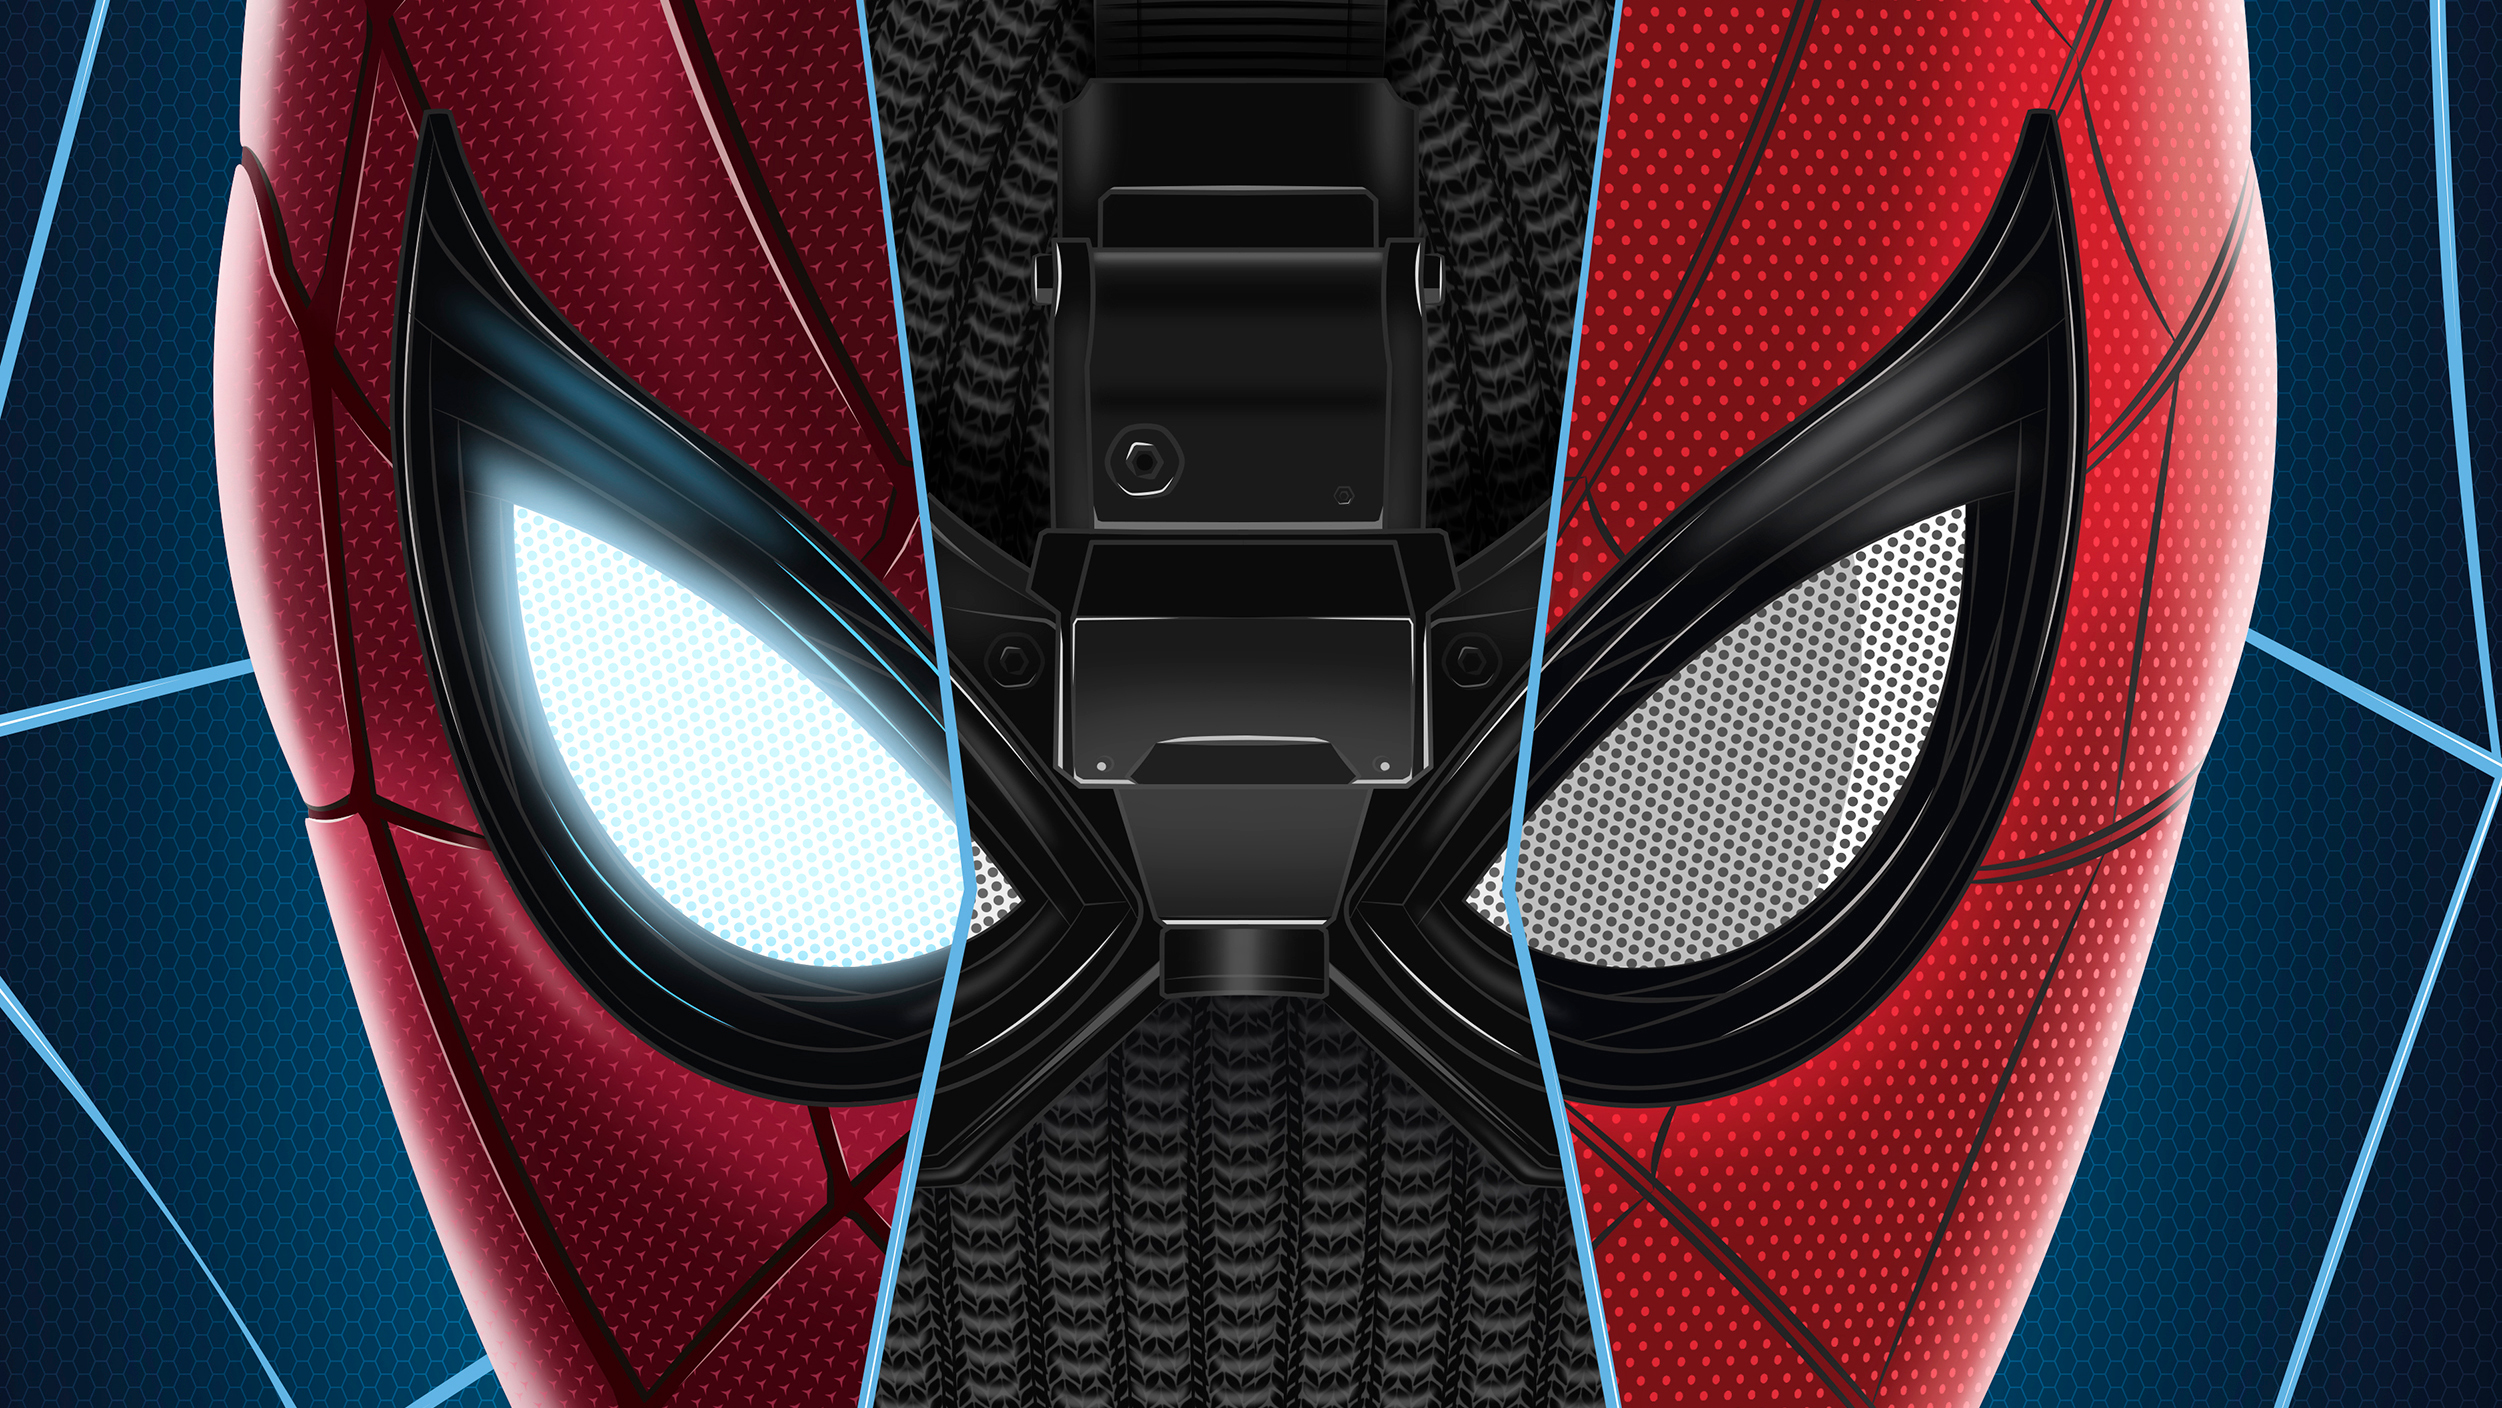 spiderman far from home movie poster 4k iPhone X Wallpapers Free Download